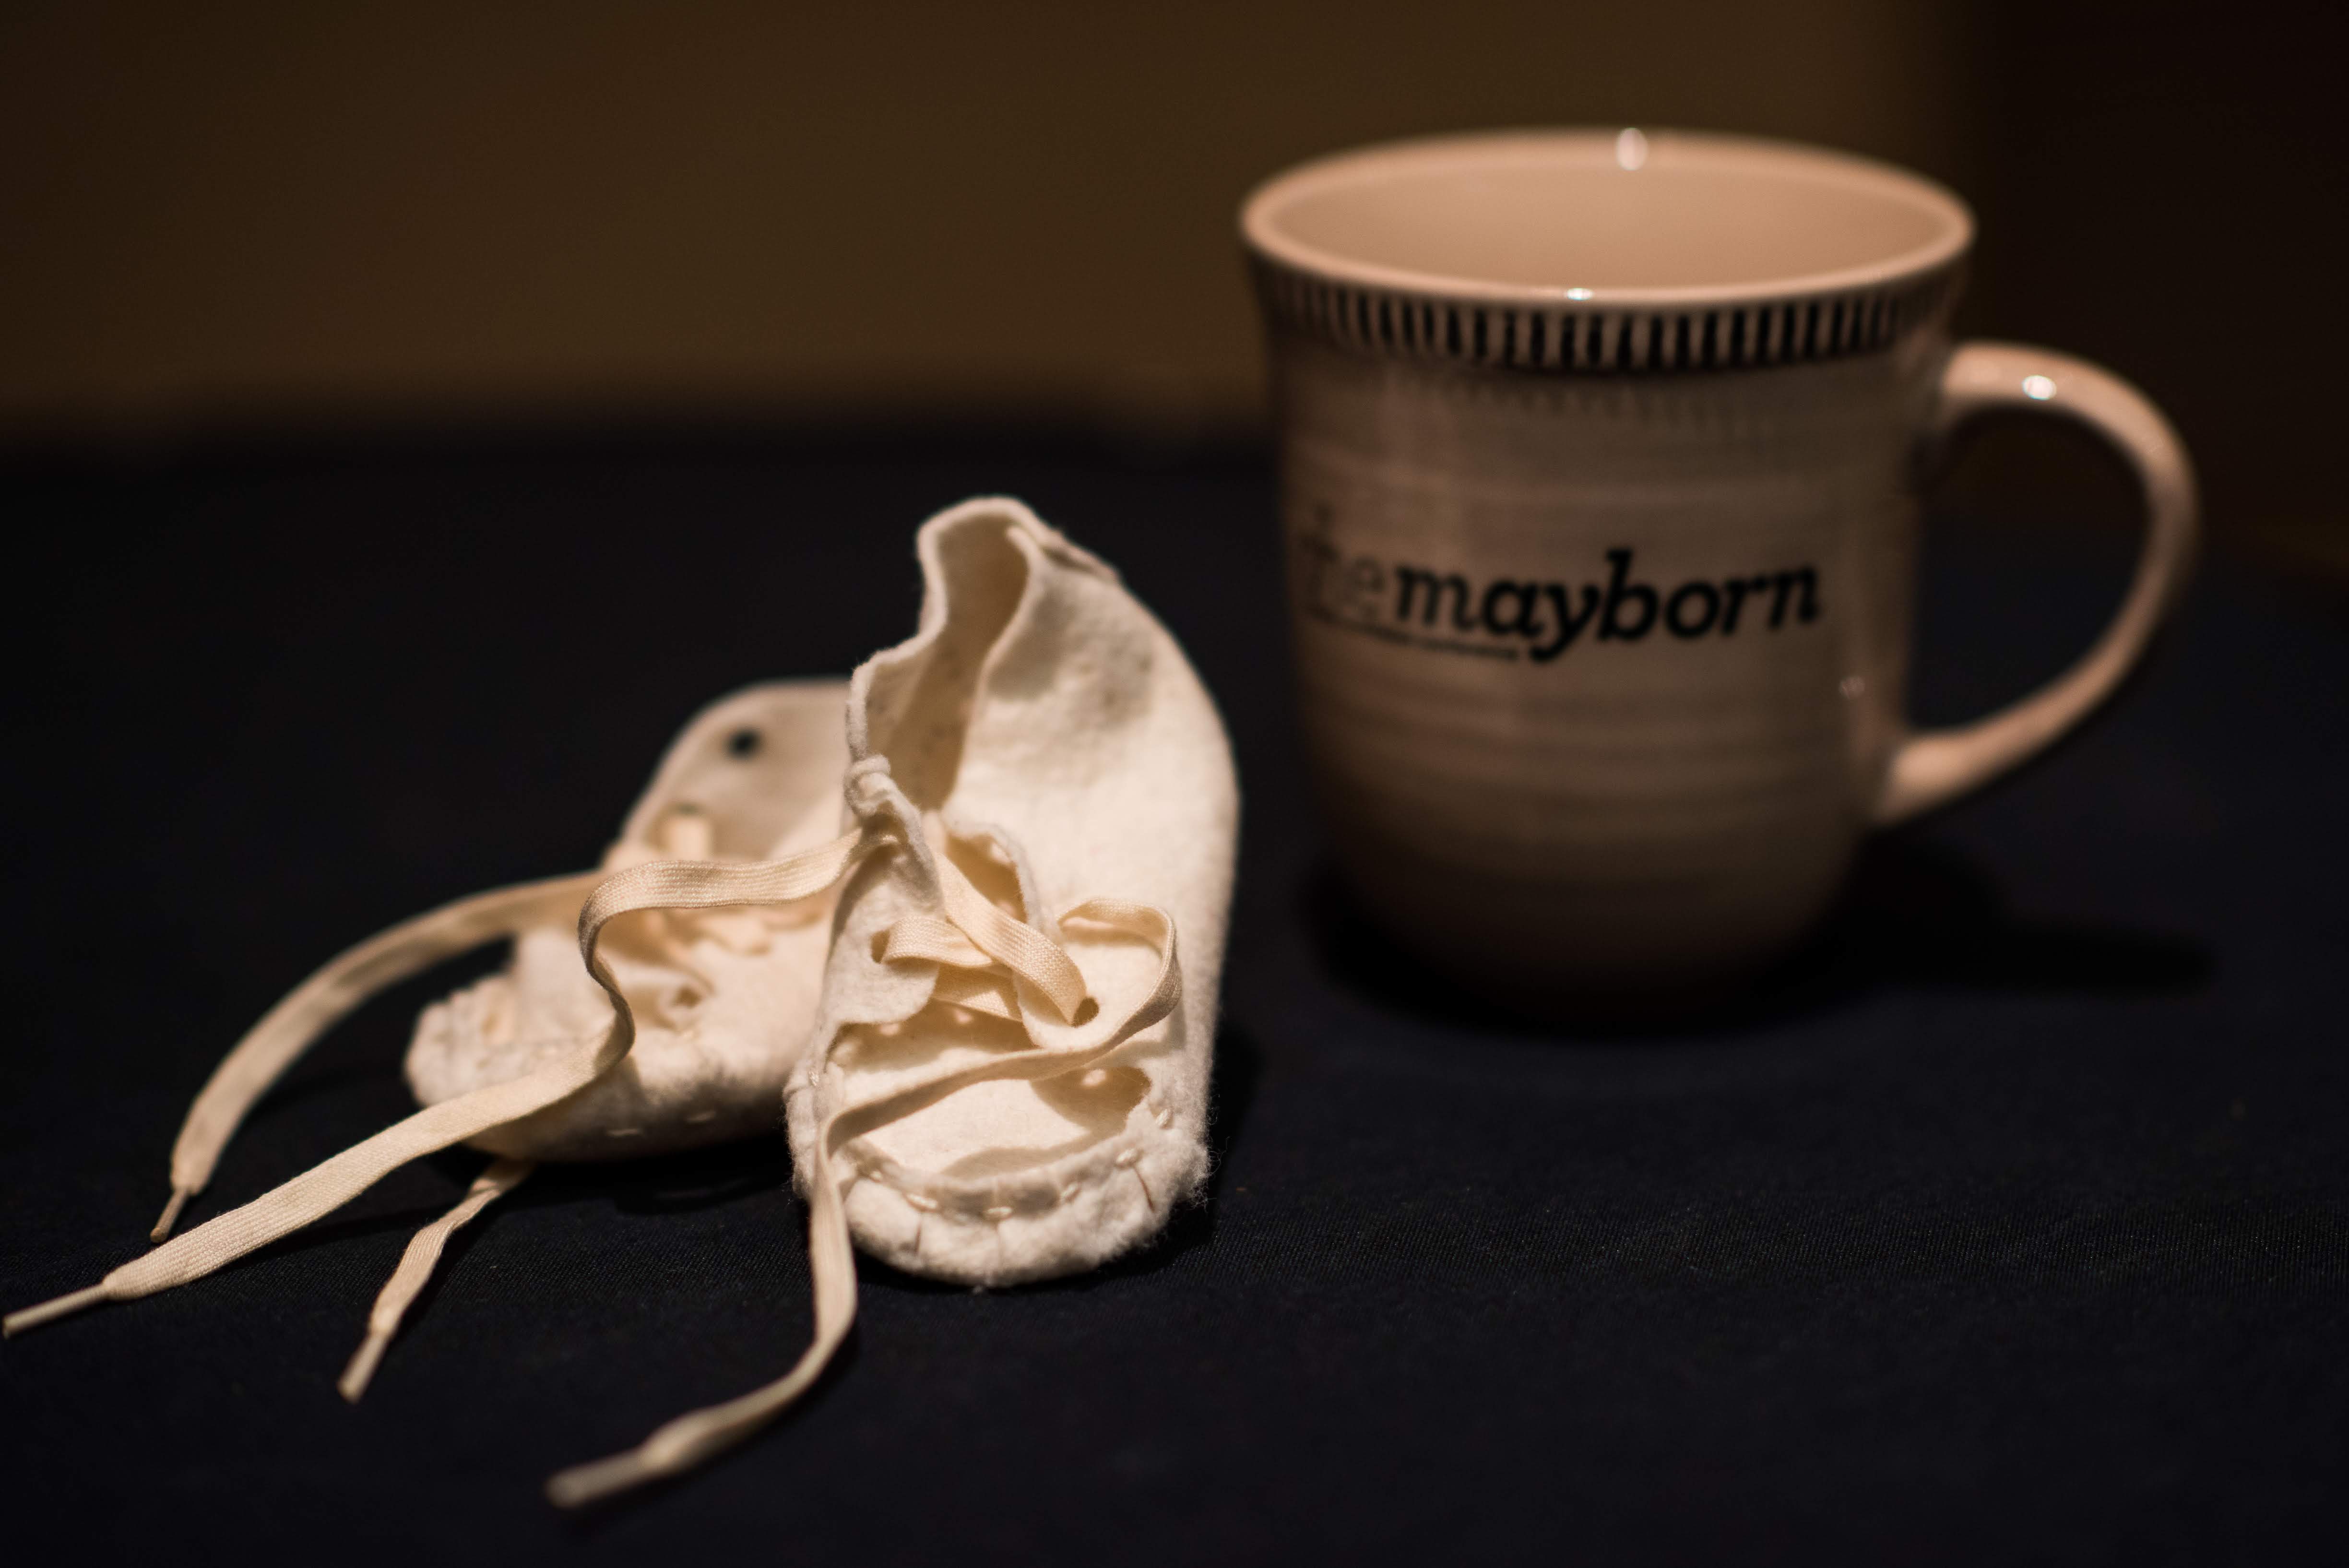 Photo of a pair of baby shoes next to a Mayborn coffee mug - representing the Mayborn Baby Shoes contest